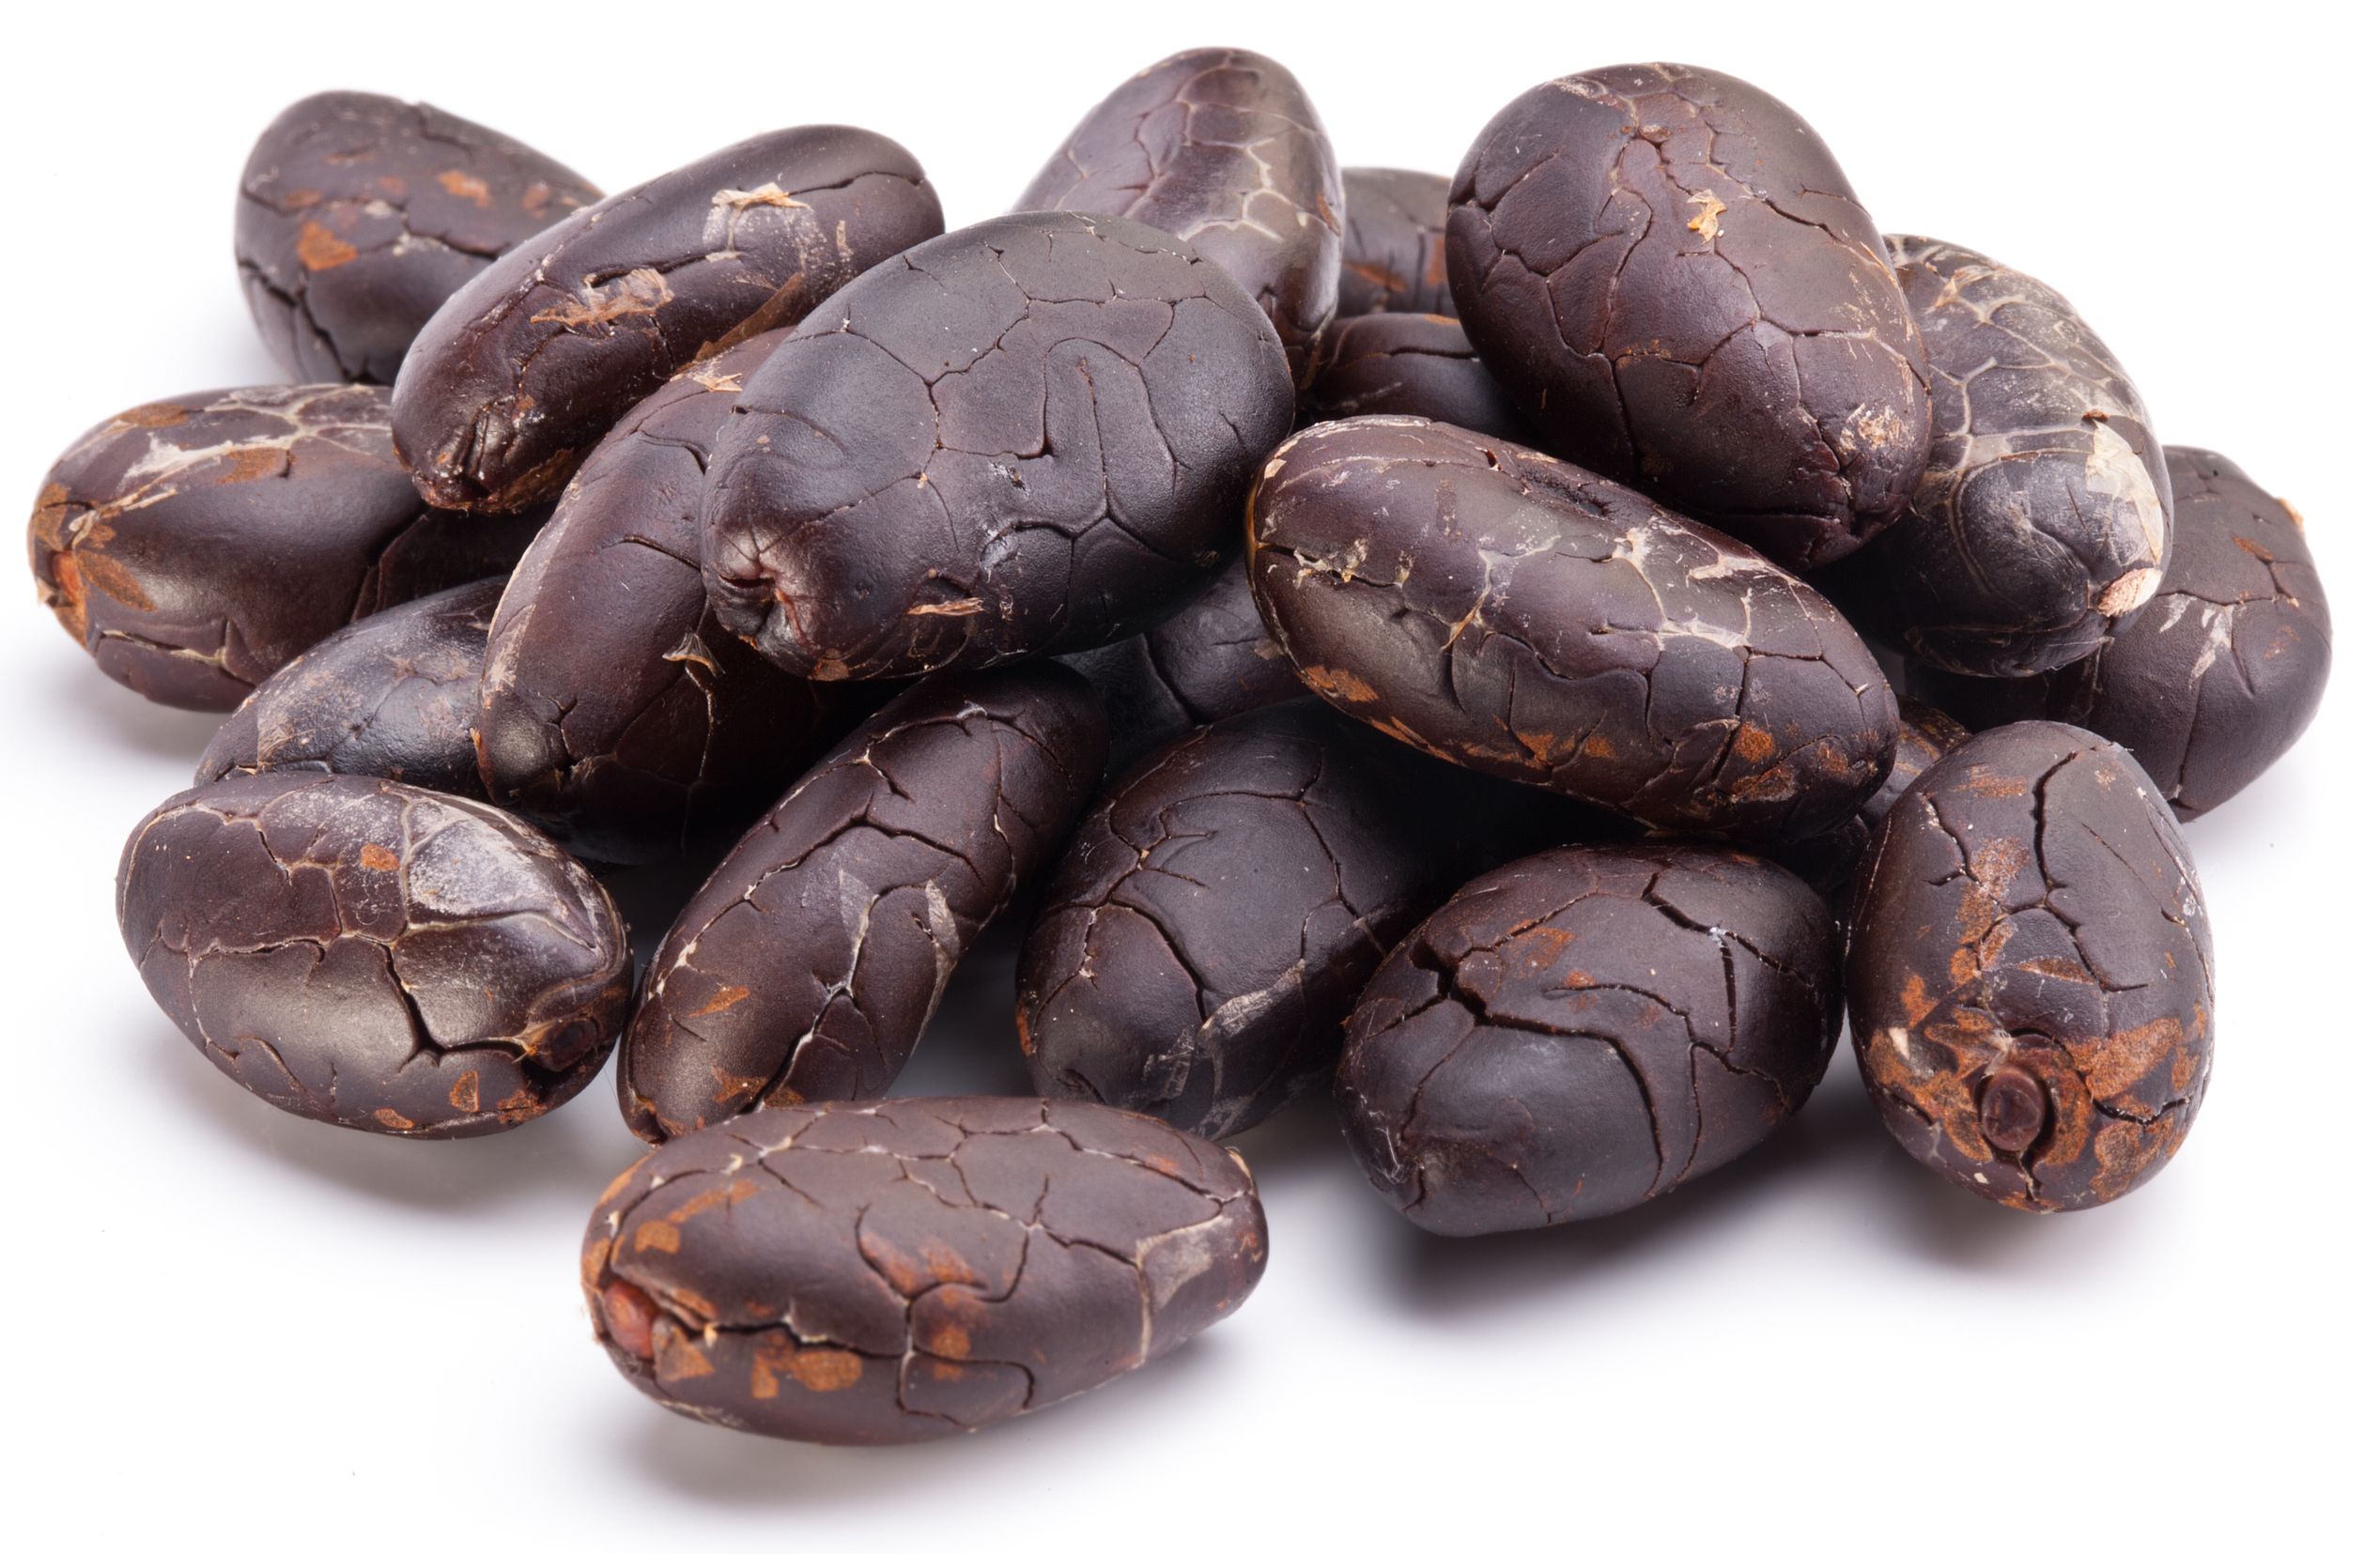 cocoa absolute oil uses and benefits